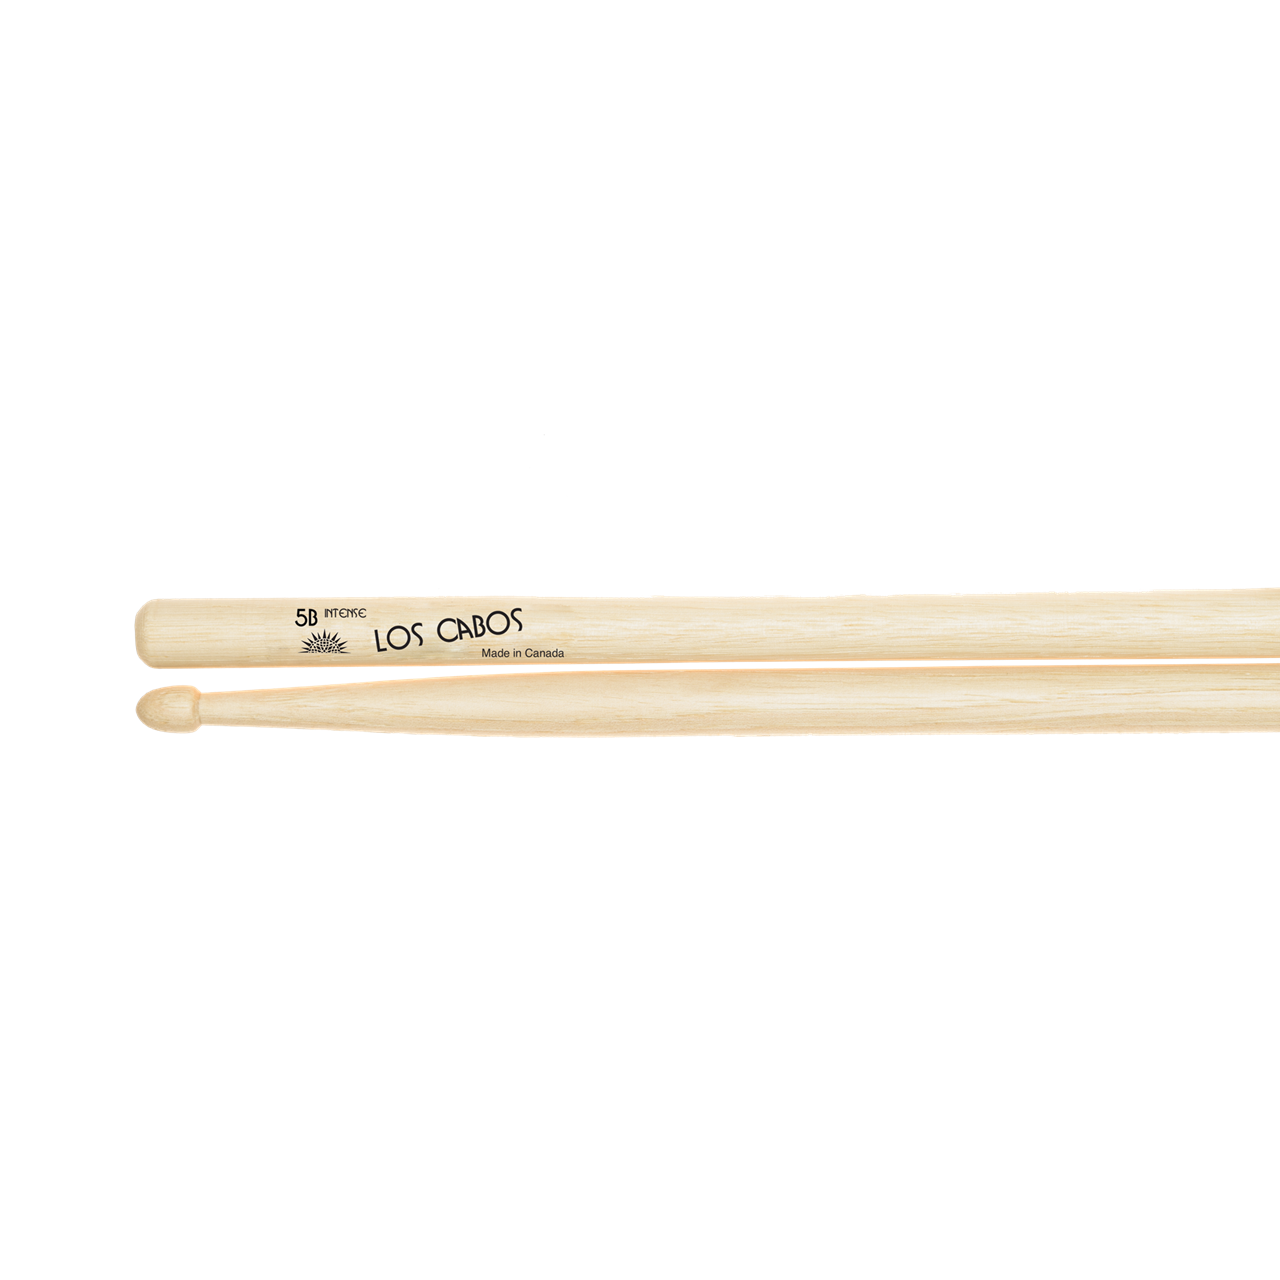 Los Cabos Drumstick 5B Intense White Hickory